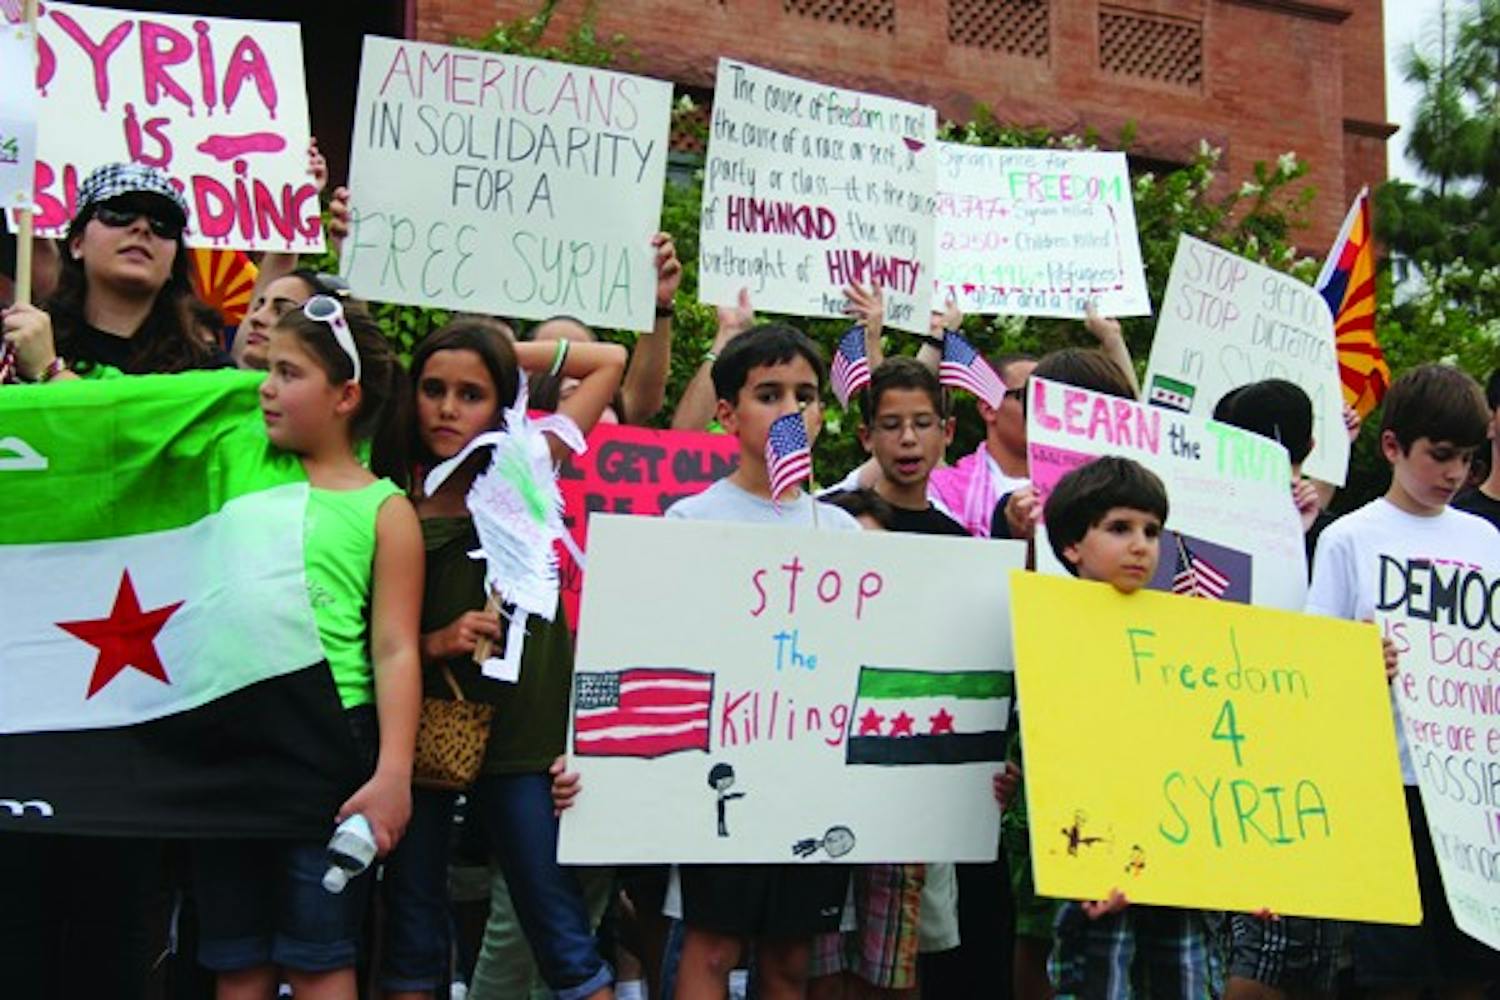 The Syrian-American Council organized the national “Walk for the Children of Syria" to raise awareness. About 130 people walked one-mile on University Drive to raise money for the cause. (Photo by Ana Ramirez)
